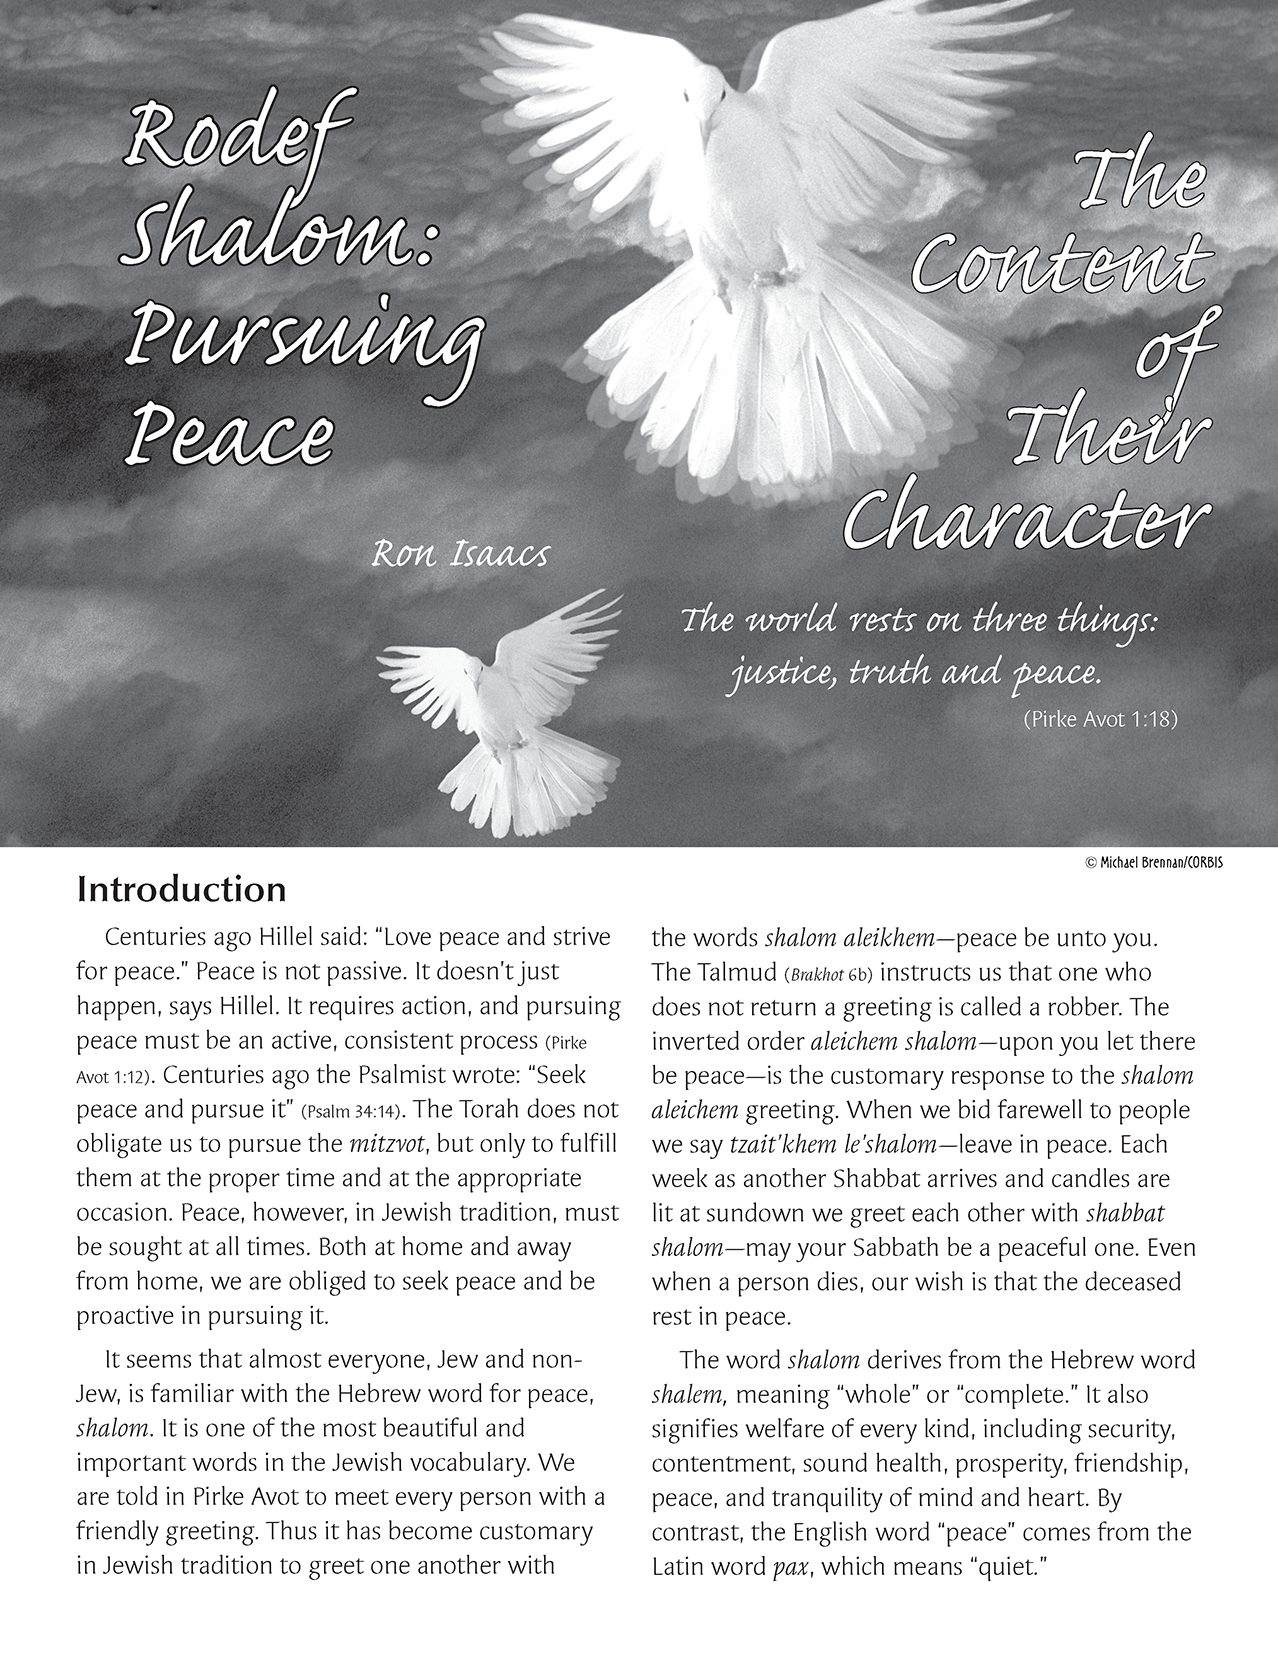 Content of Their Character: Rodef Shalom (Pursuing Peace)